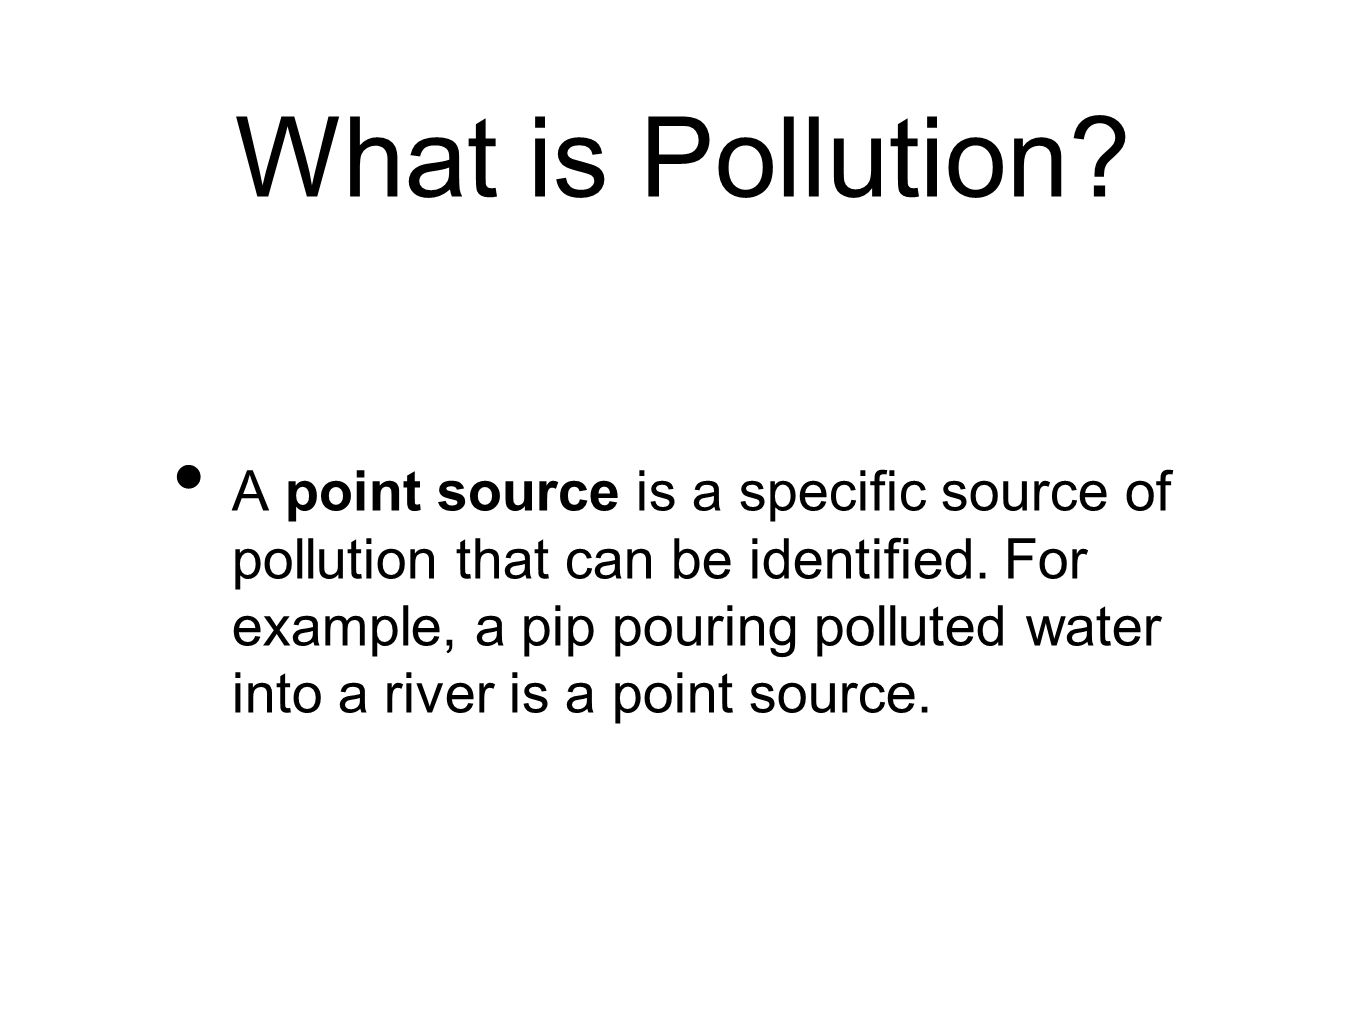 What is Pollution. A point source is a specific source of pollution that can be identified.